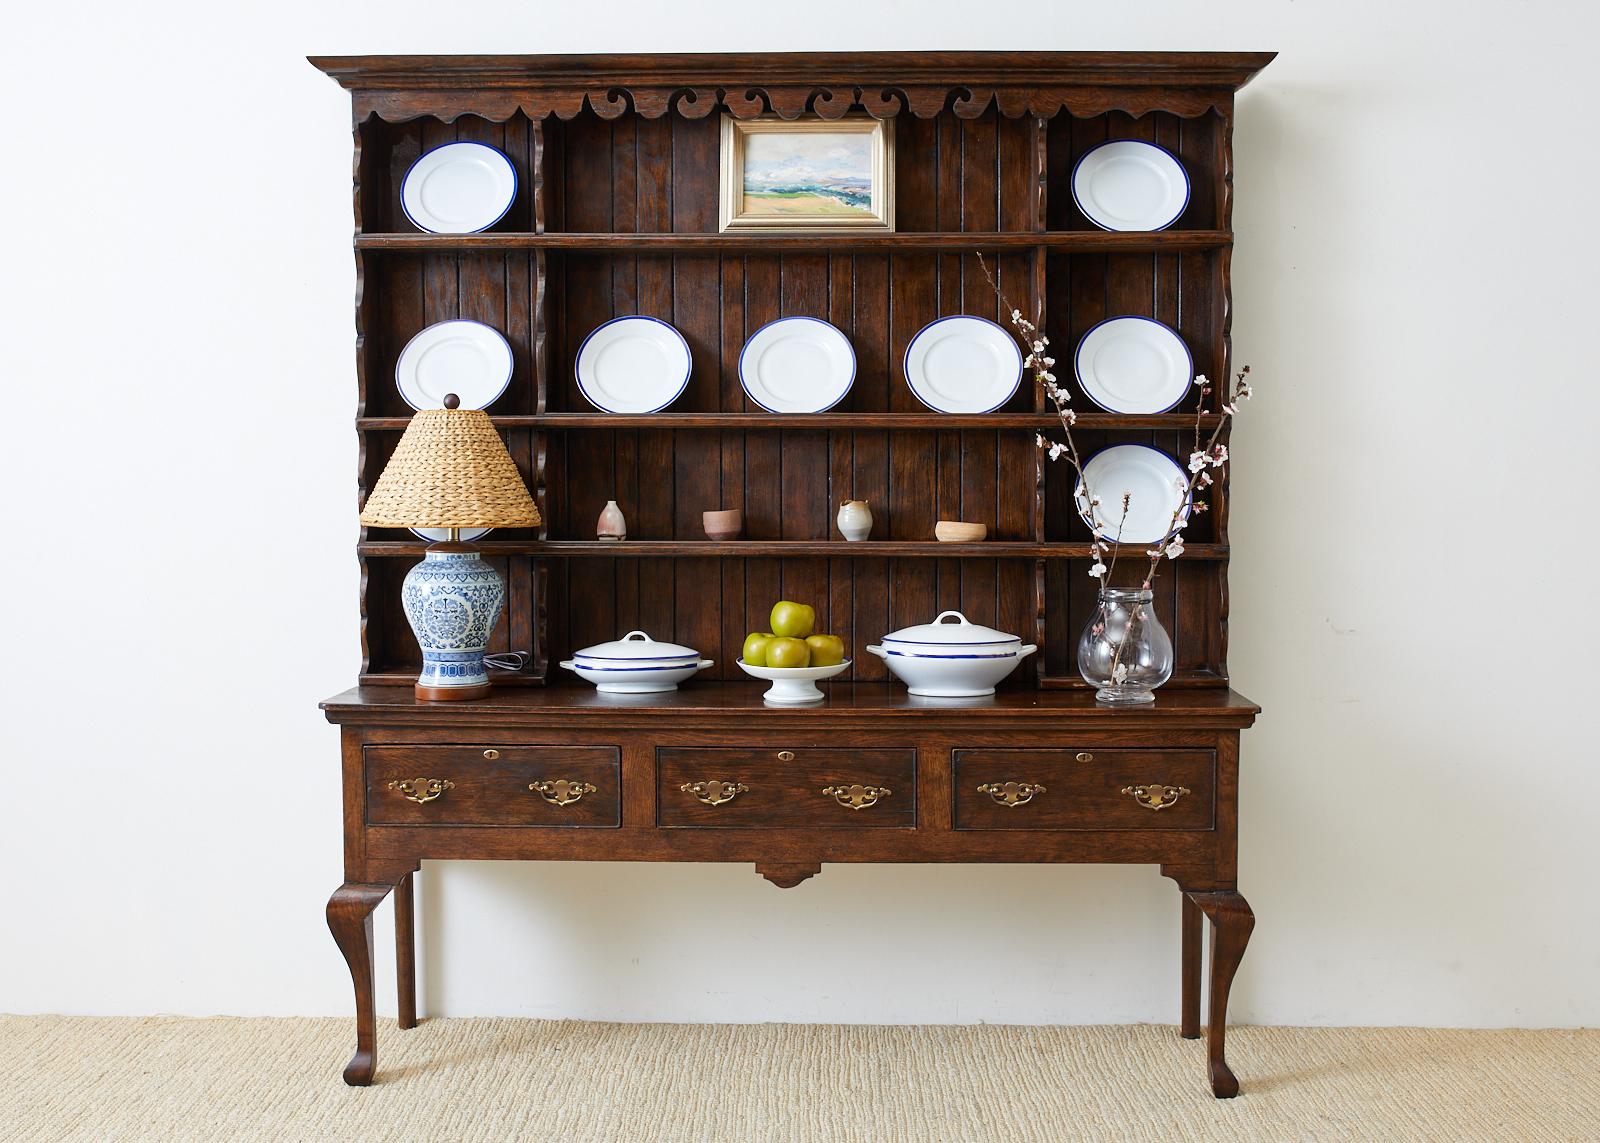 Handsome English oak welsh cupboard with dresser crafted in the Georgian taste. Finely made two-part cabinet having a corniced top and a shaped frieze. Three large shelves for plate storage on top supported by a three-drawer dresser. Each drawer